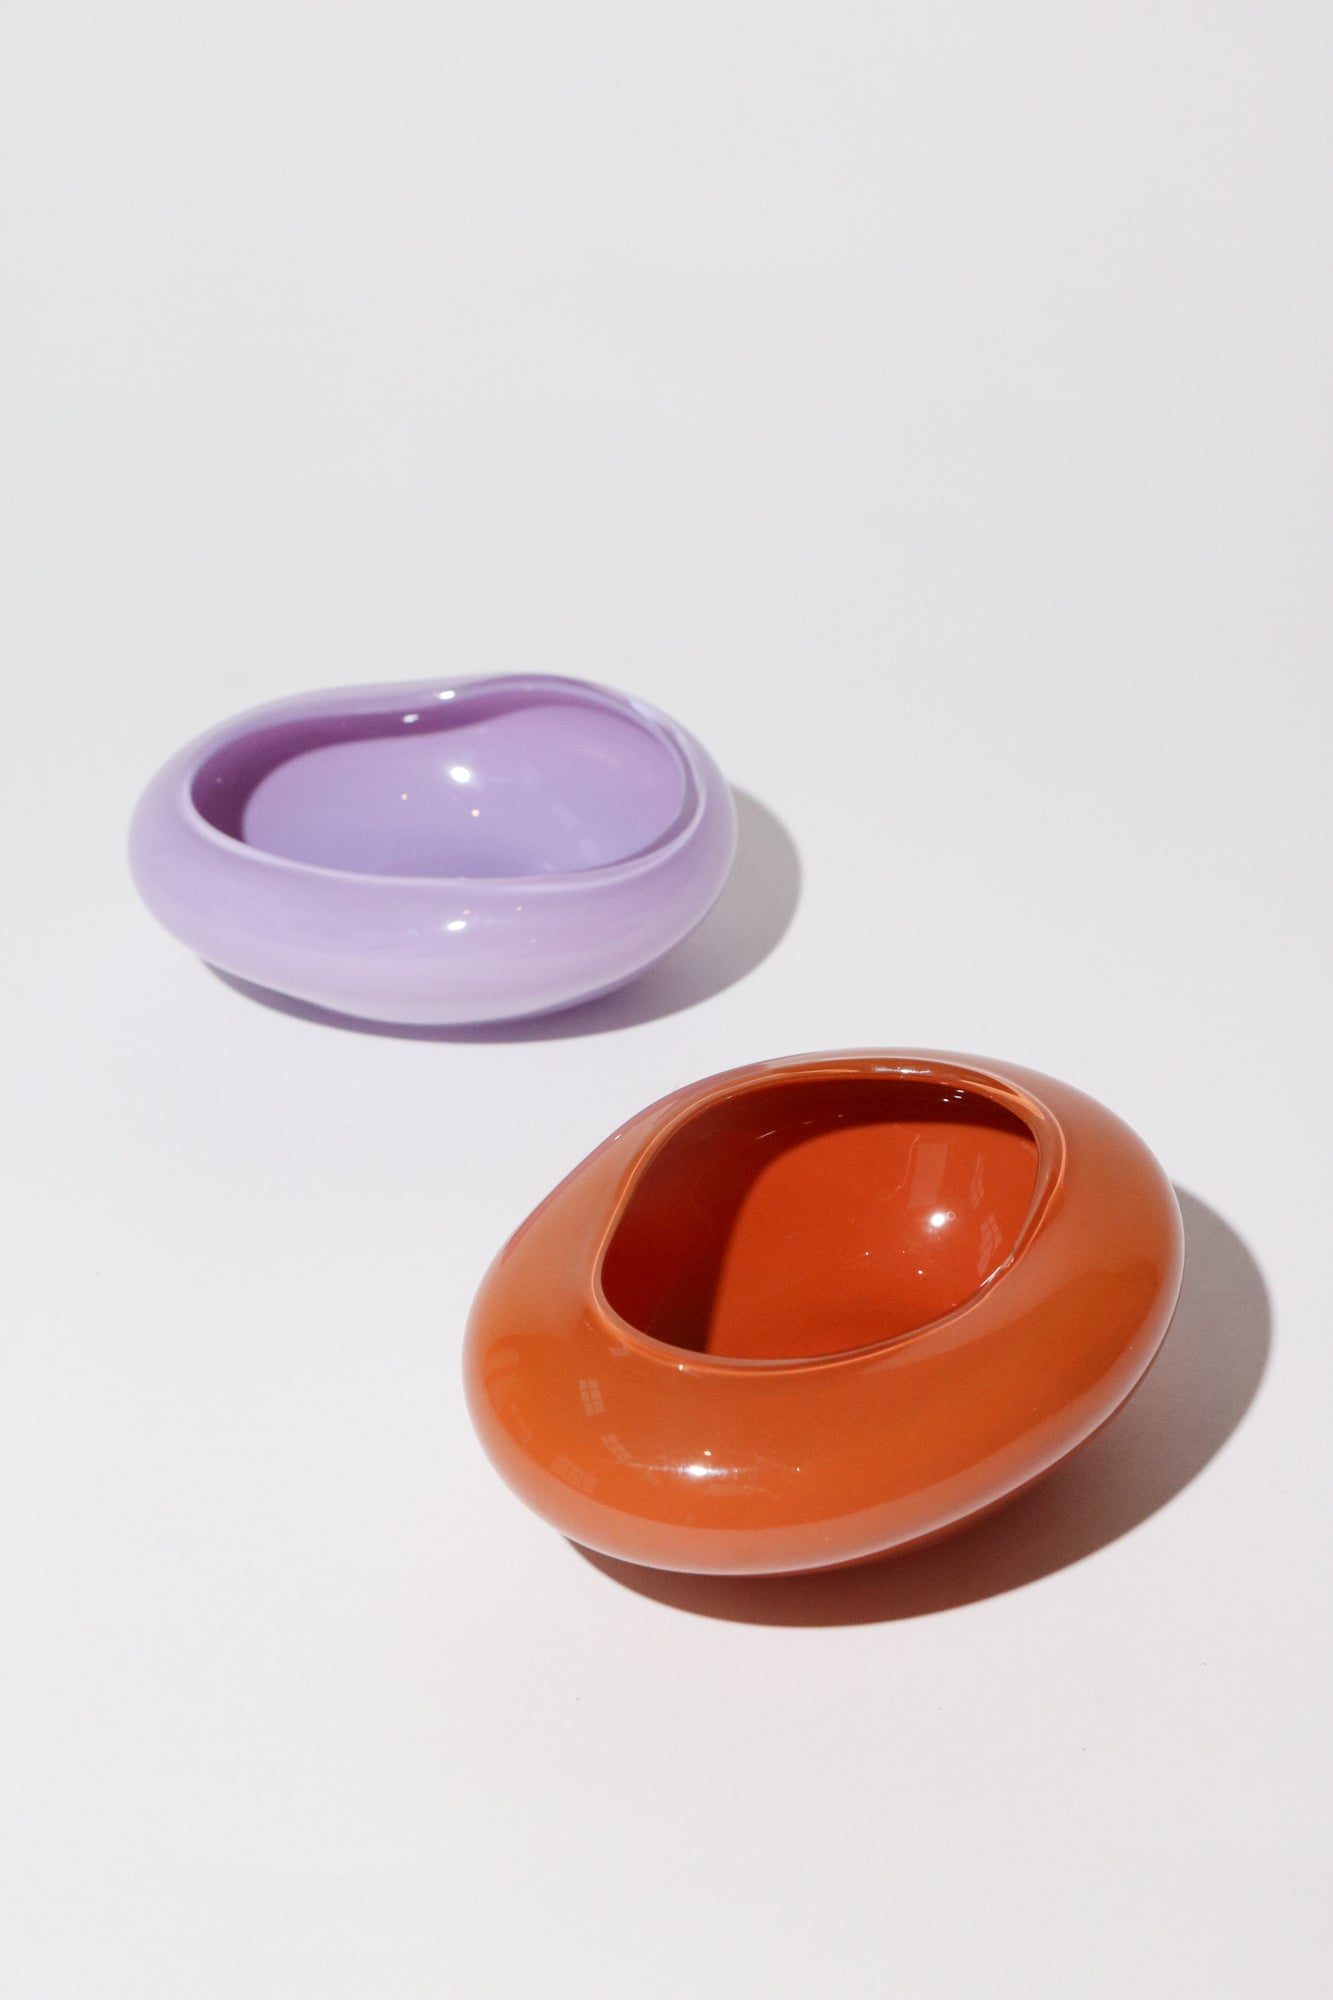 Helle-Mardahl-Candy-Dish-Set-in-Lavender-&-Almond-Shop-Sommer